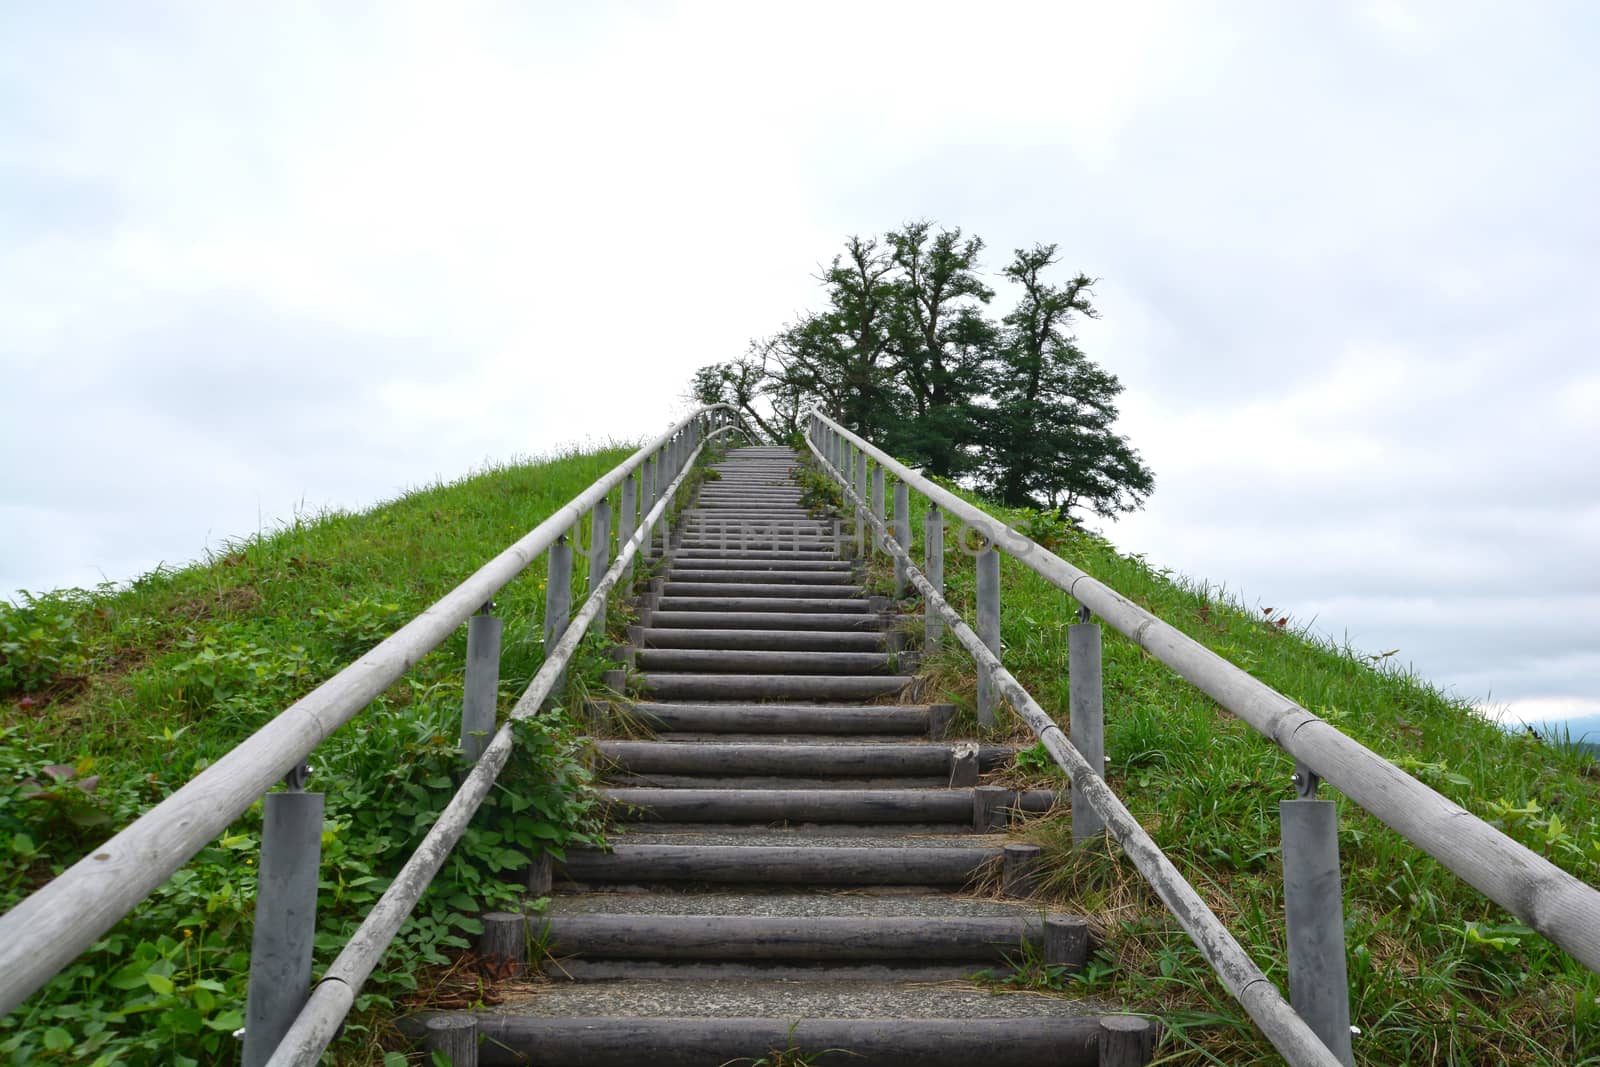 Stairway up the green hill